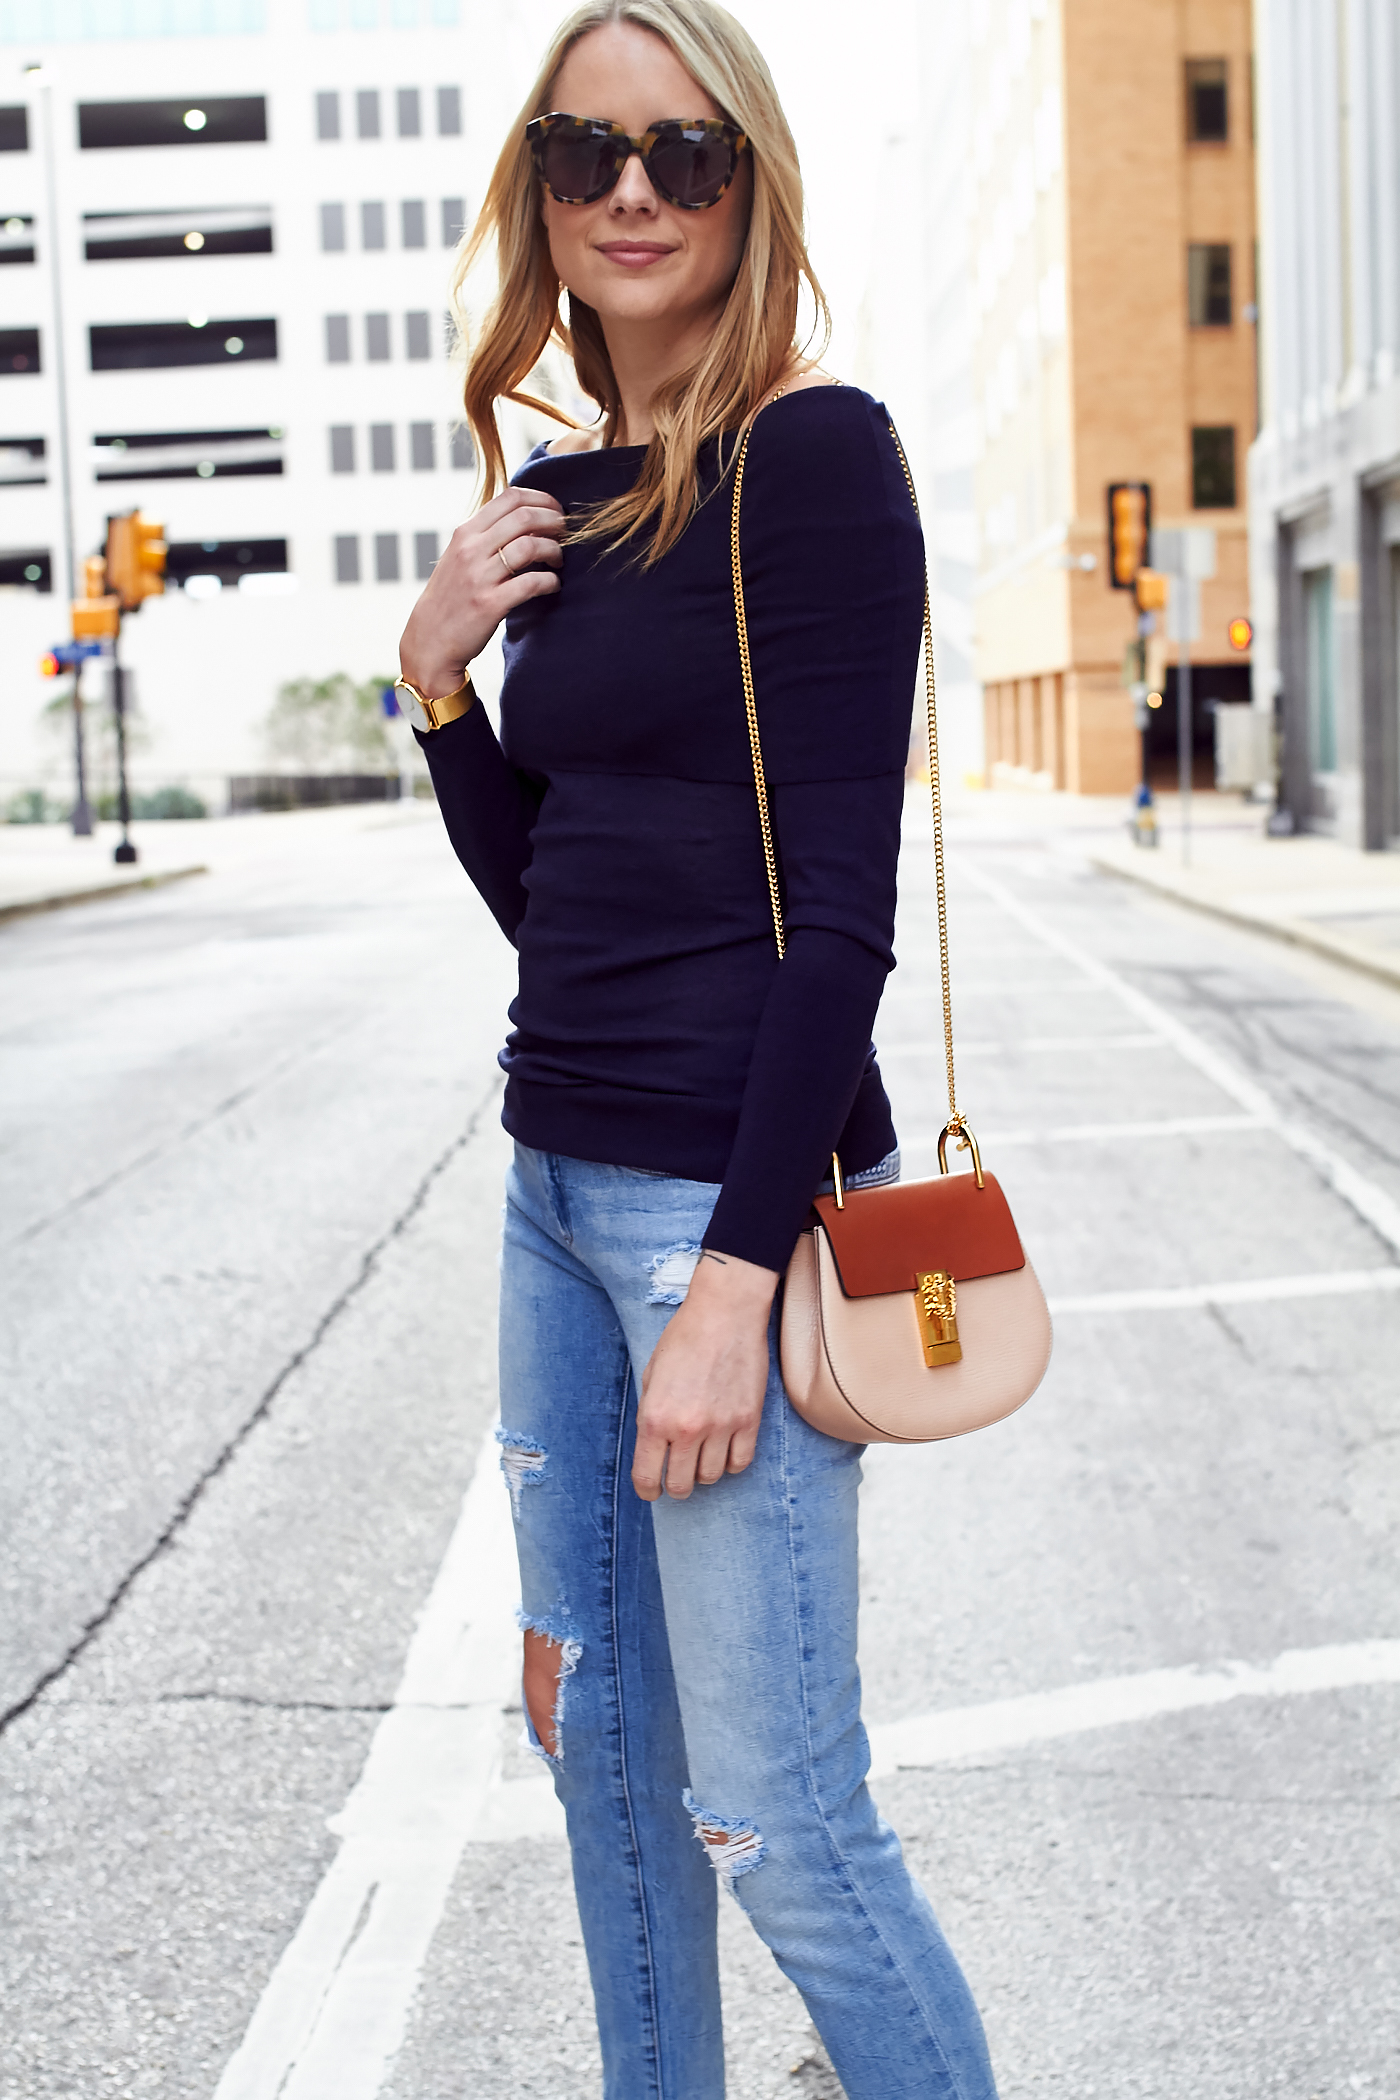 blanknyc denim jeans, christian louboutin pigalle nude pumps, autumn cashmere navy off the shoulder sweater, chloe drew handbag, fall outfit